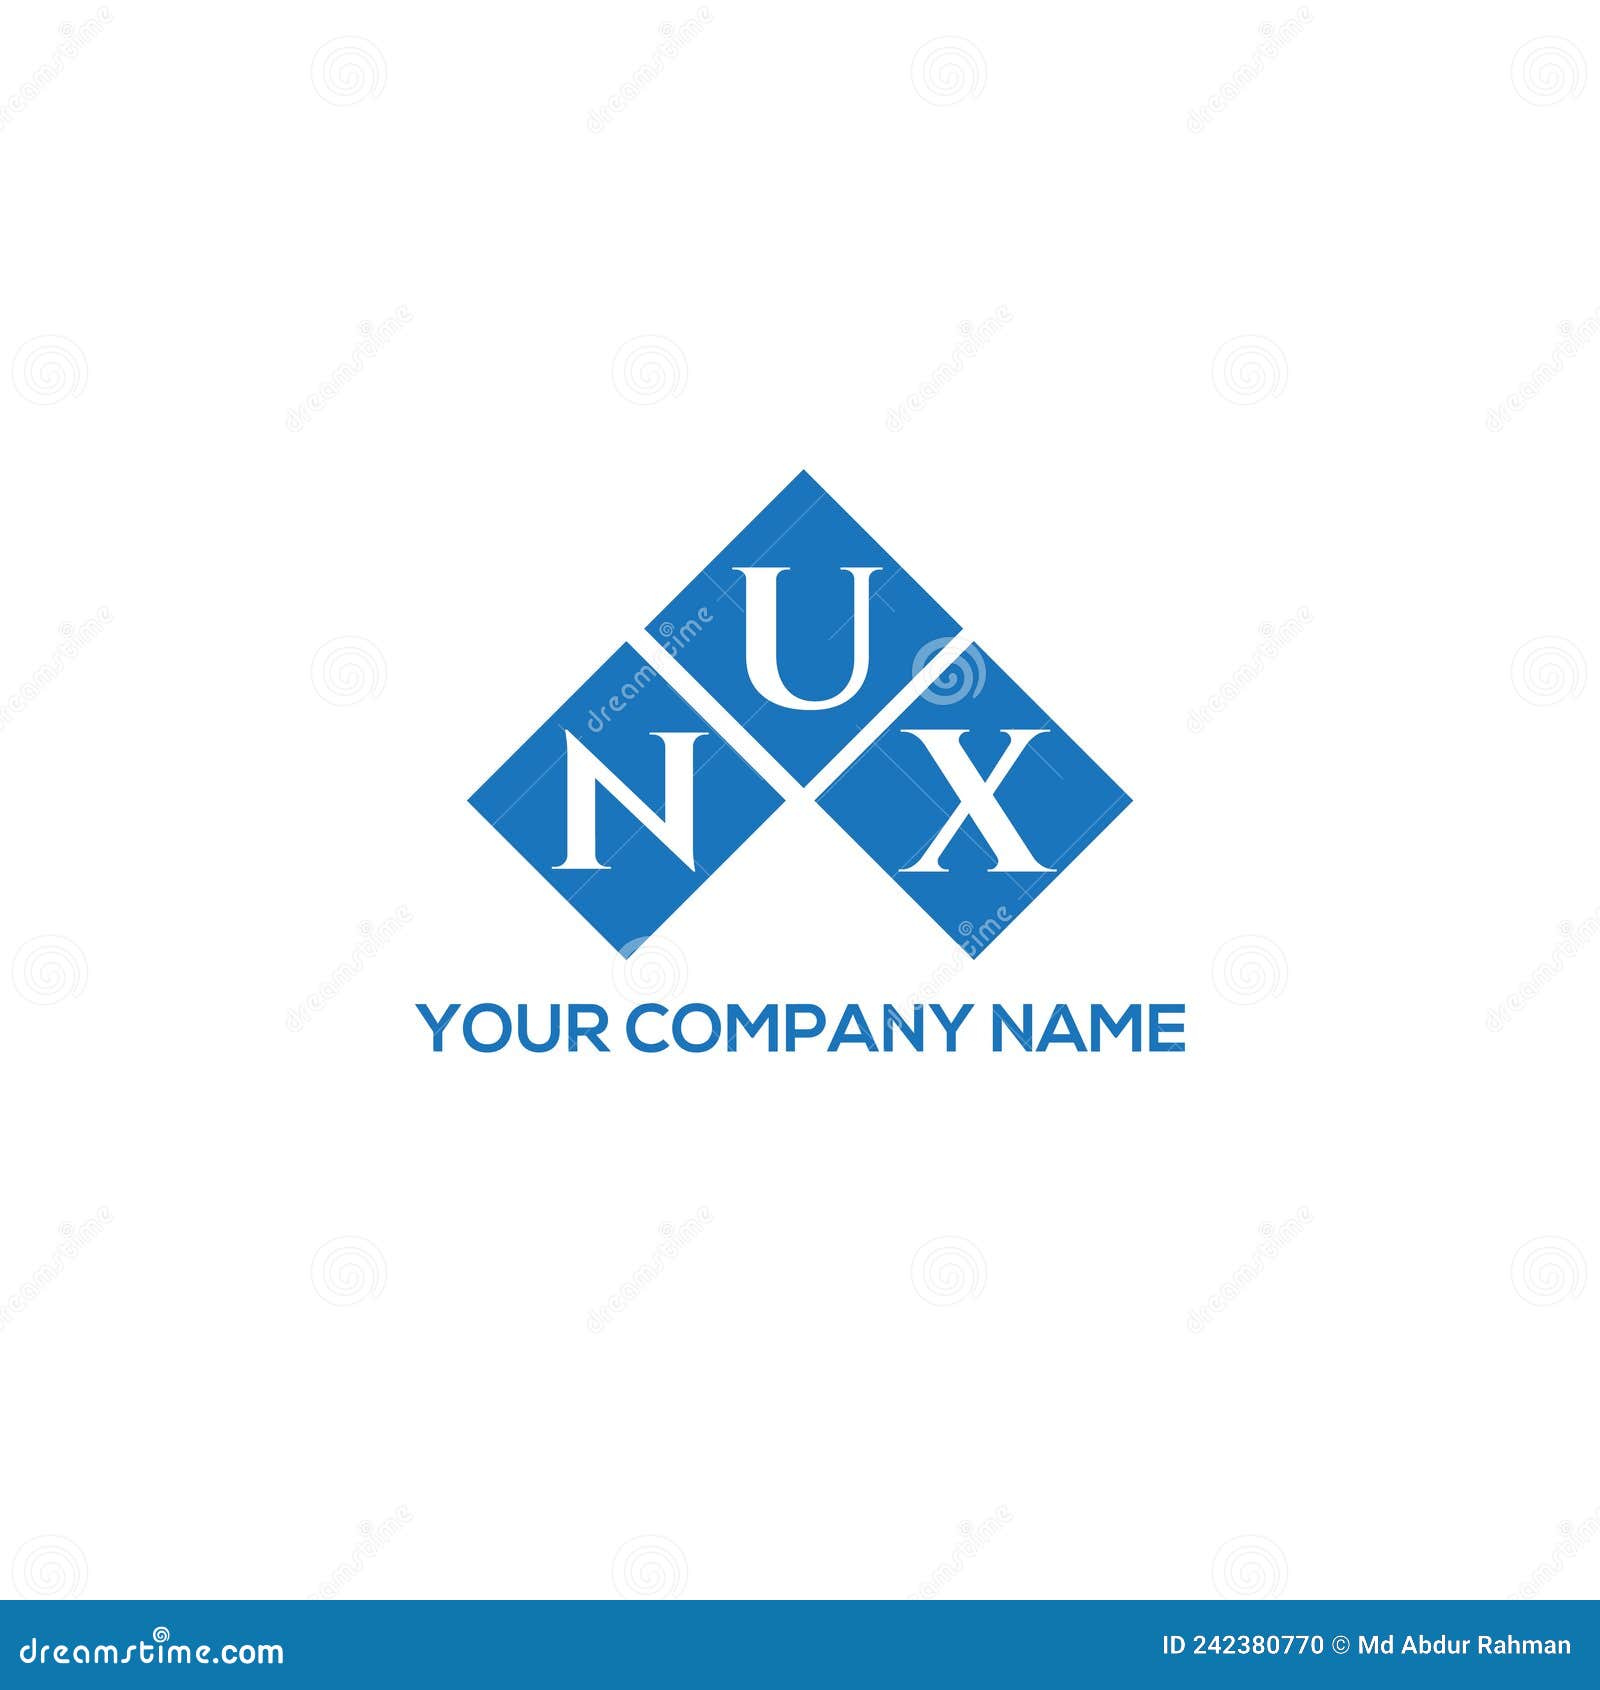 nux letter logo  on white background. nux creative initials letter logo concept. nux letter 